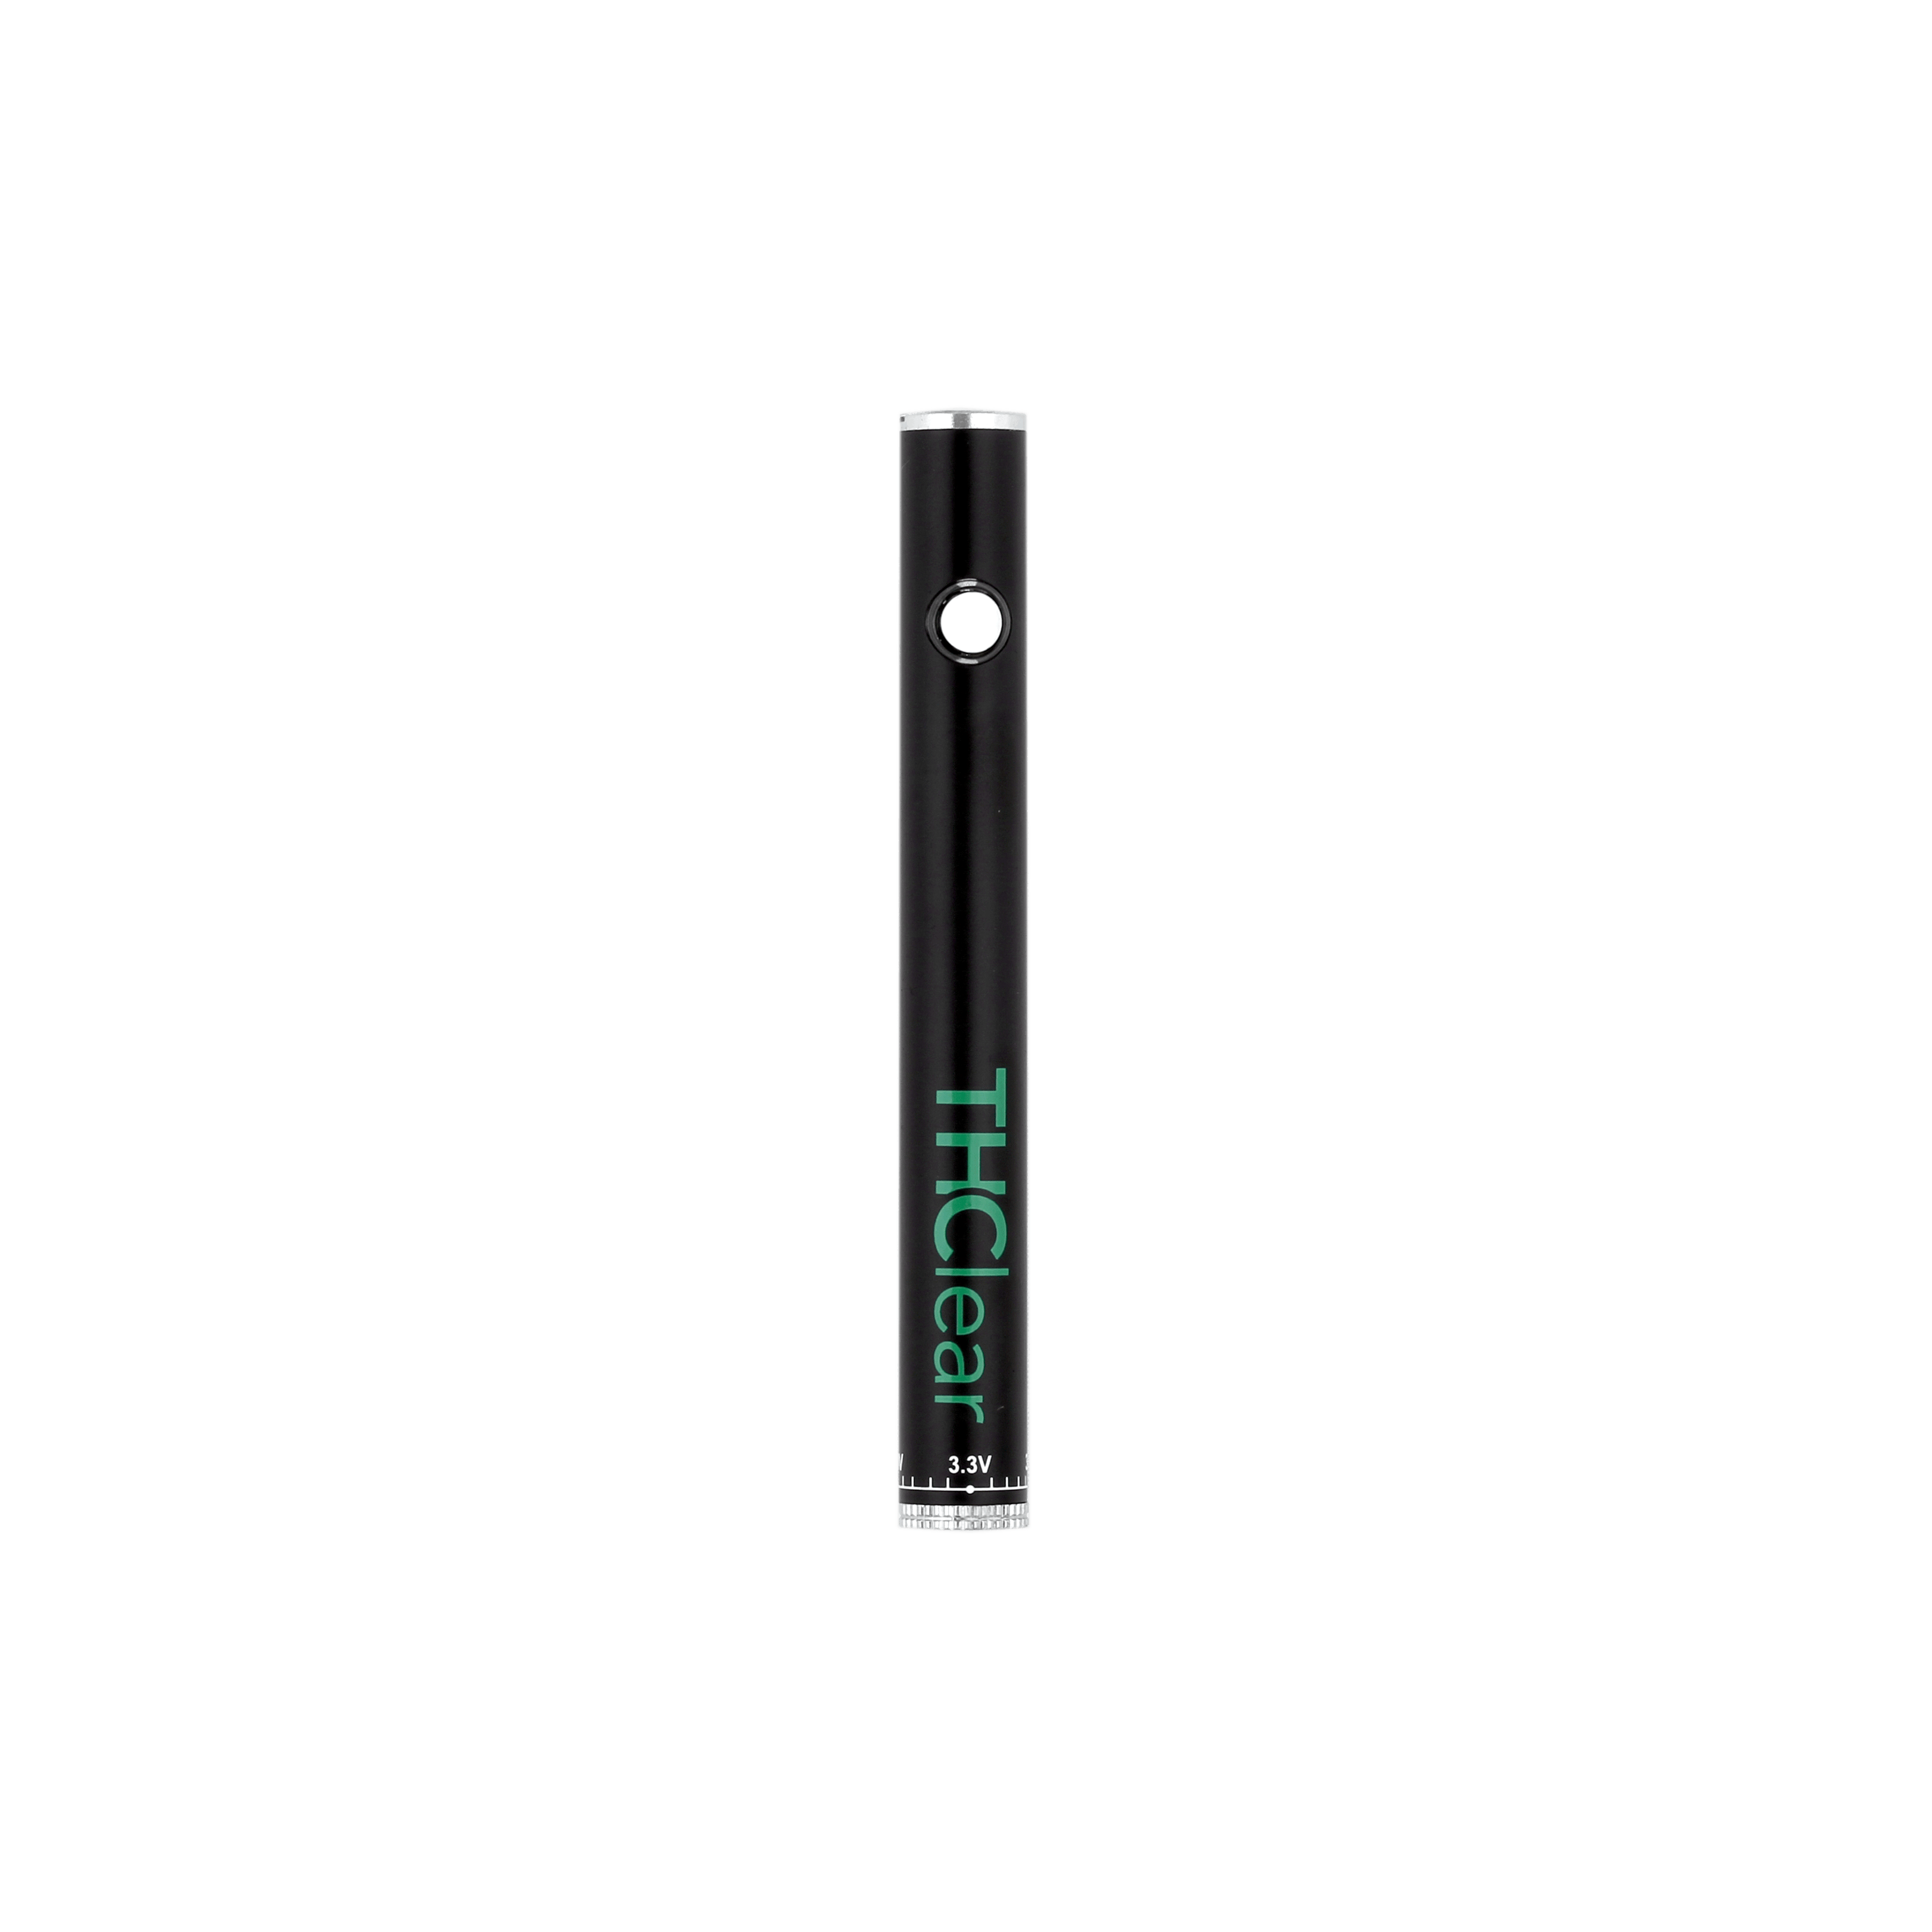 marijuana-dispensaries-manchester-remedy-in-los-angeles-battery-kit-variable-voltage-black